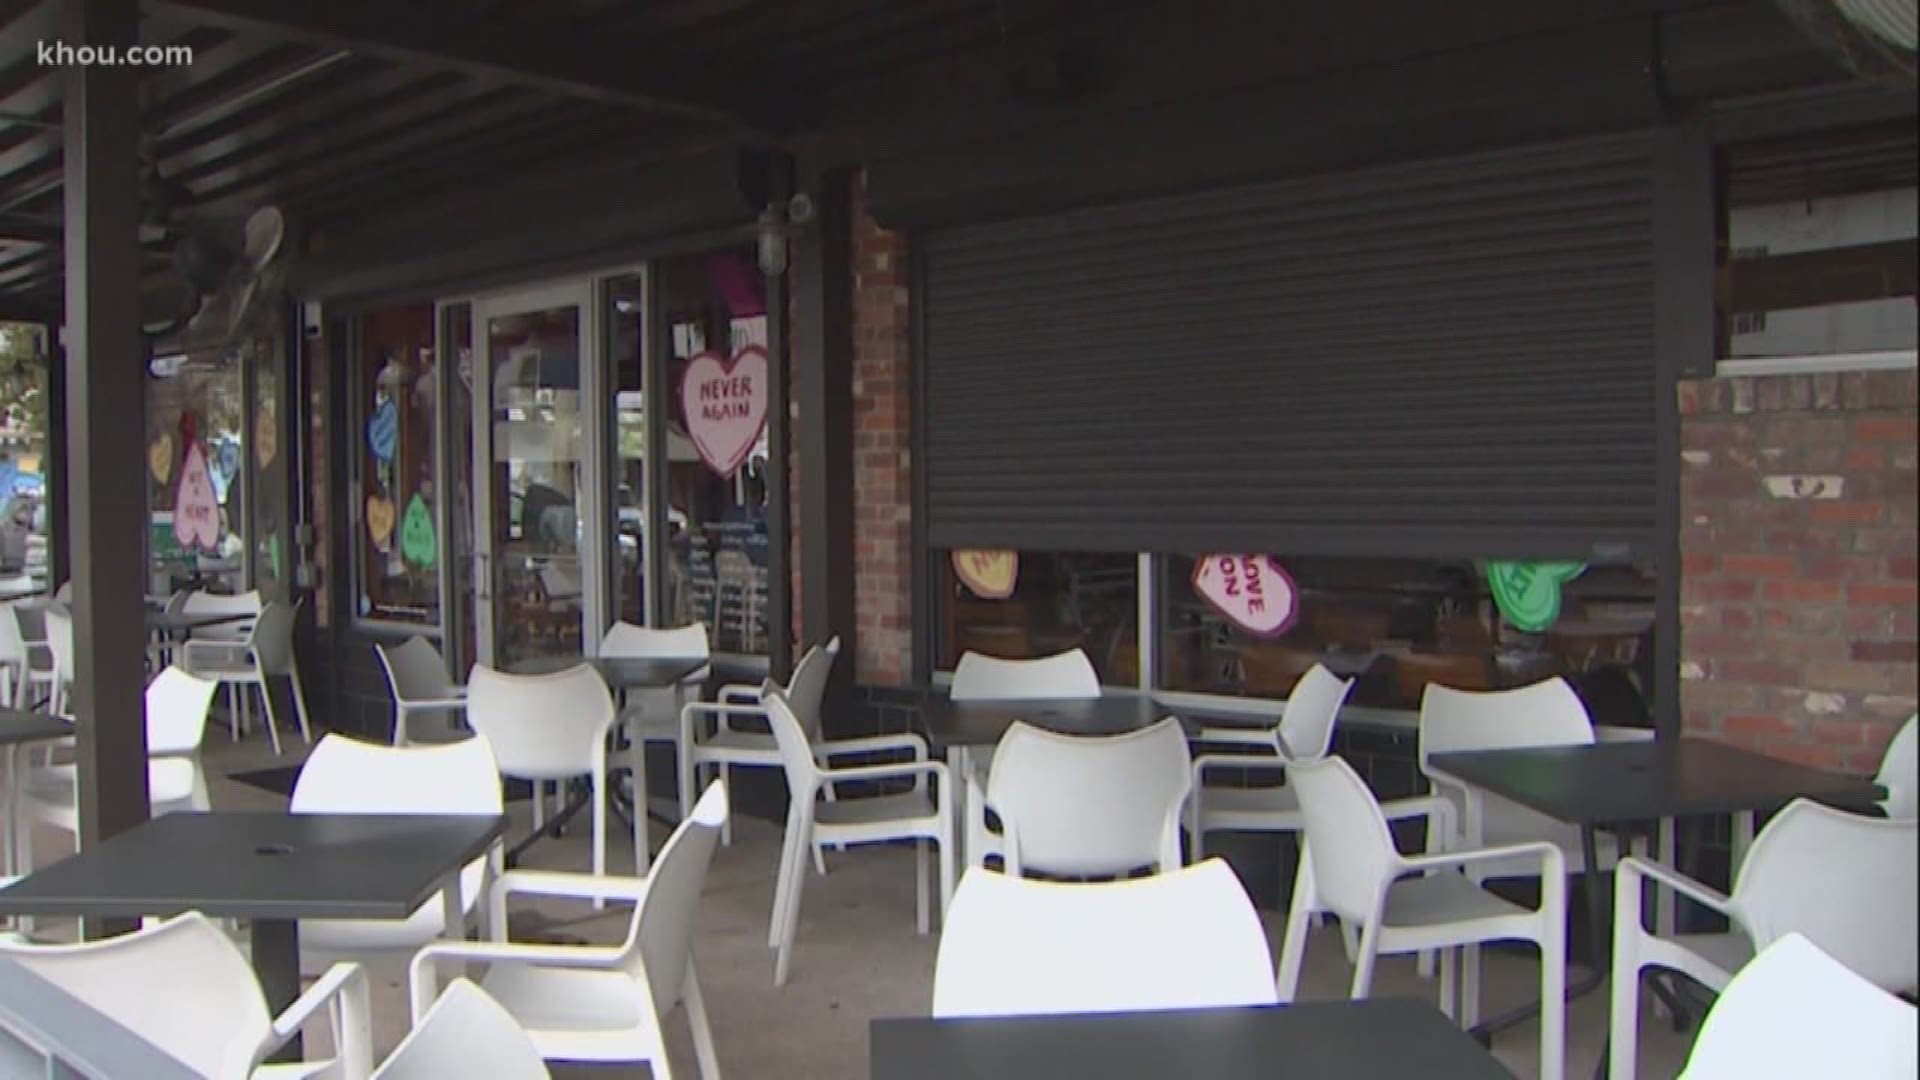 Businesses are beefing up security while the Houston Police Department is developing a plan to combat break-ins.